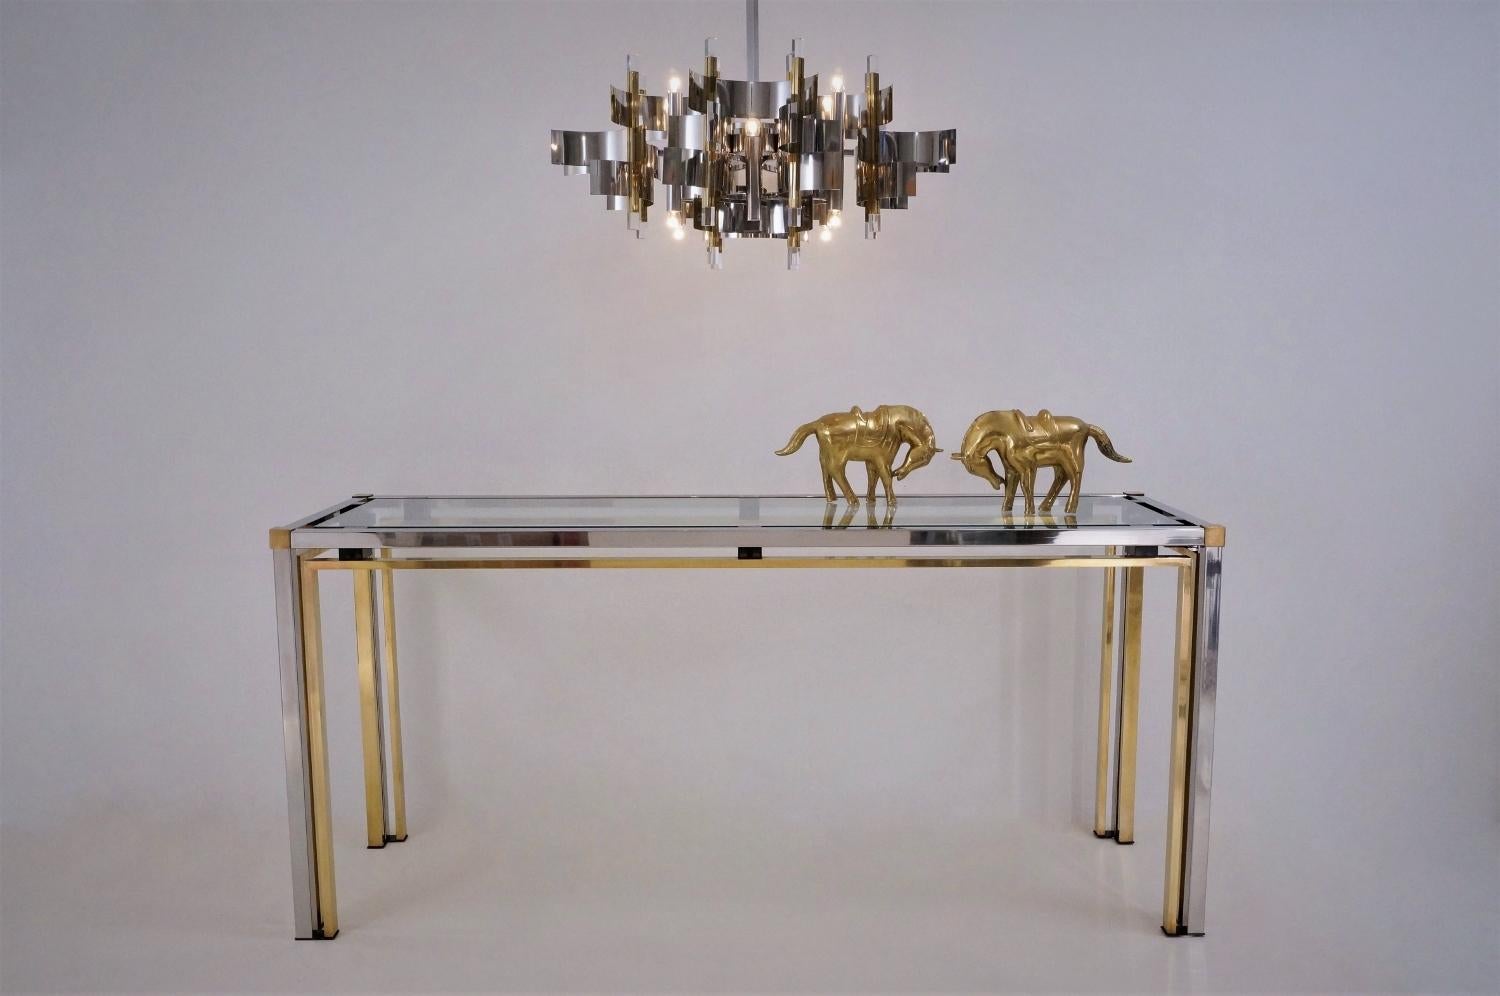 Brushed Sciolari Chandelier `Futura` 12-Lights, Brass, Chrome and Lucite, 1976 Italian For Sale